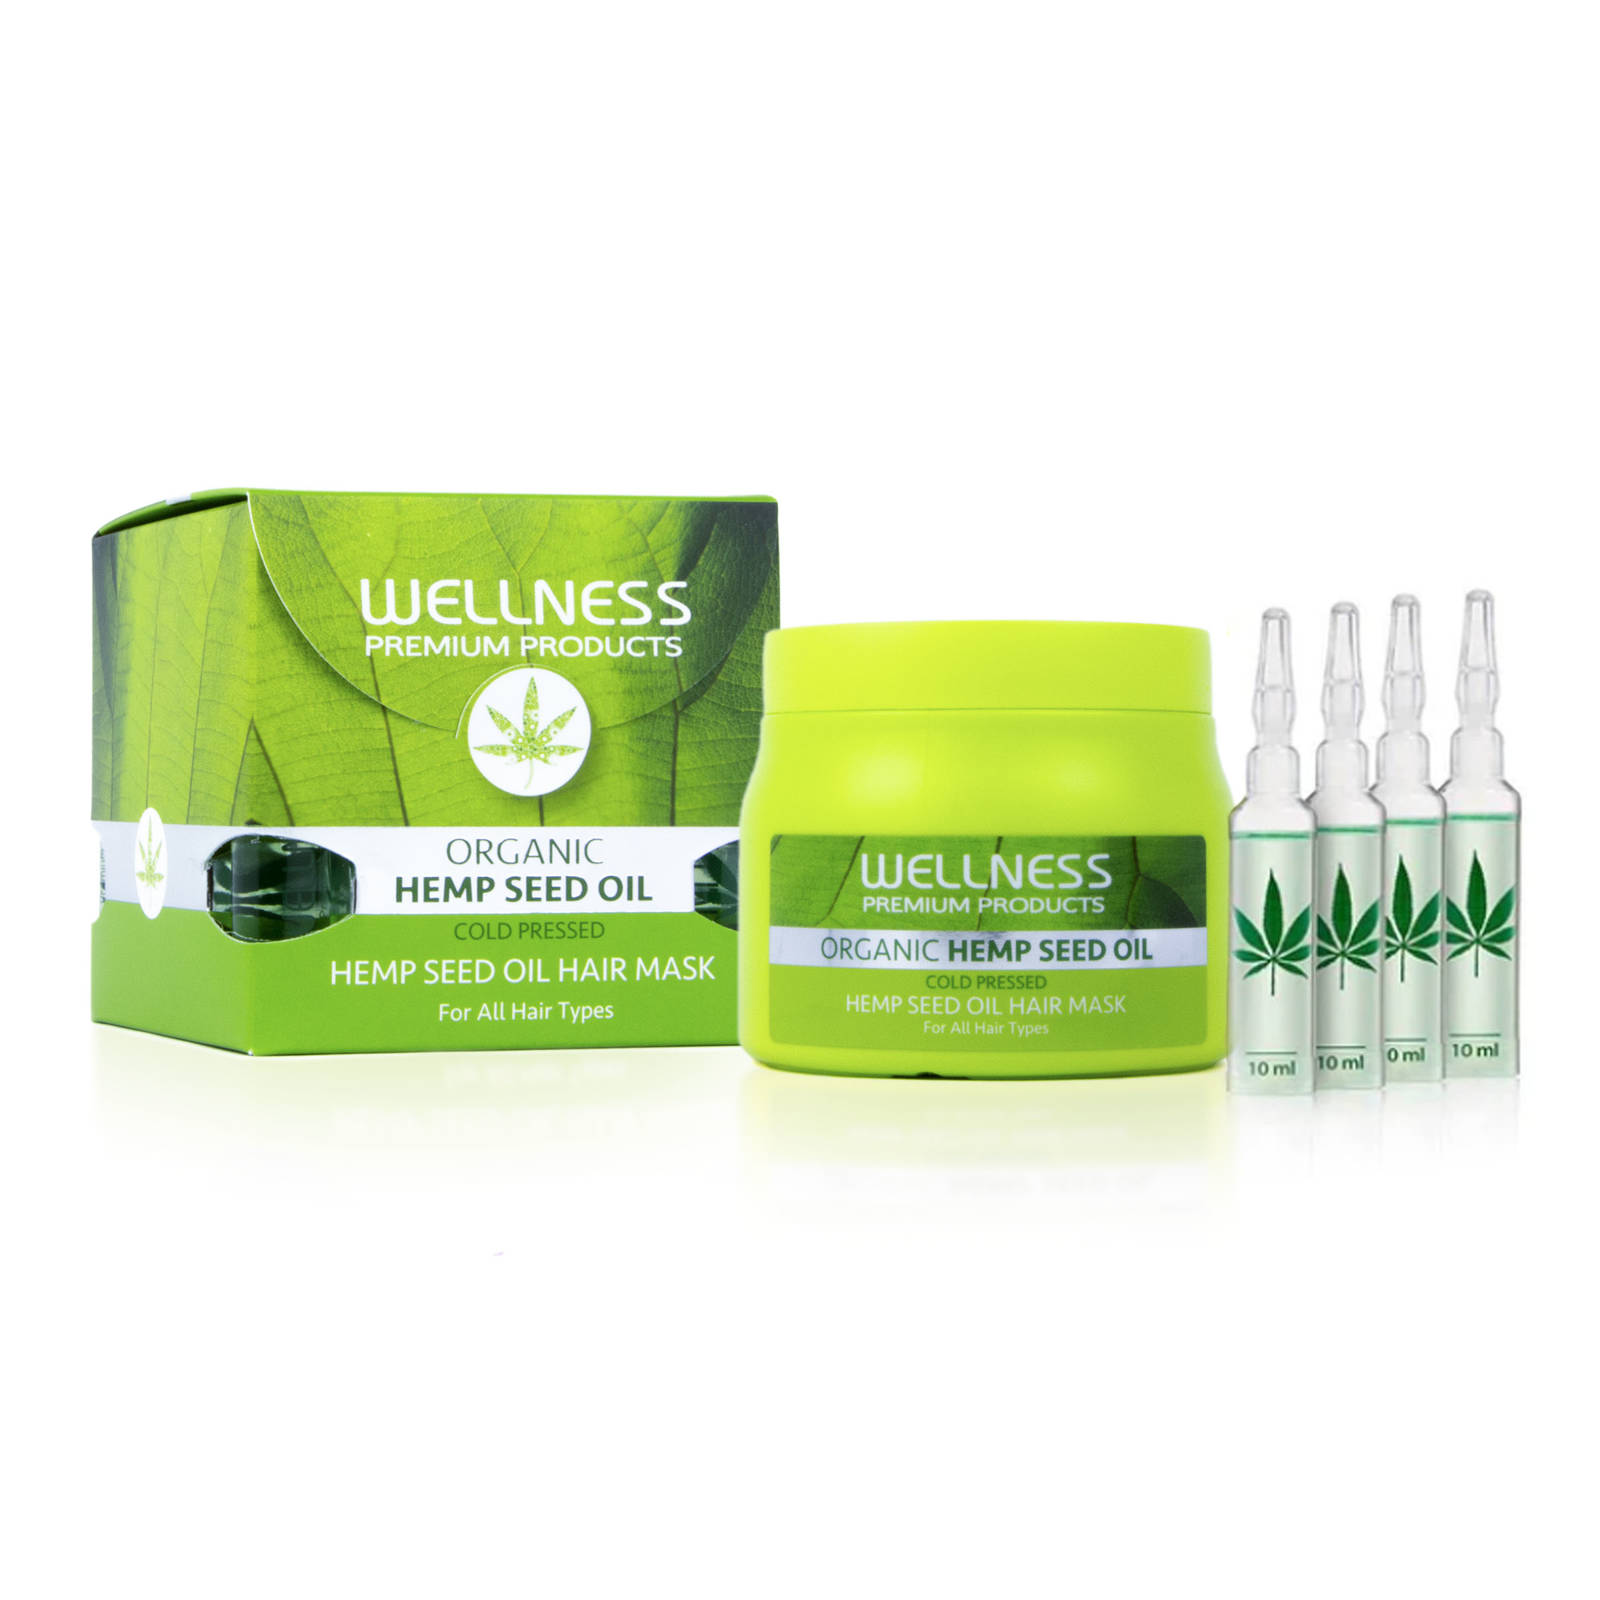 WELLNESS PREMIUM PRODUCTS intensive set (shampoo 500ml, mask 500ml + 4  ampoules) | HAIR \ VALUE & GIFT SETS SETS 